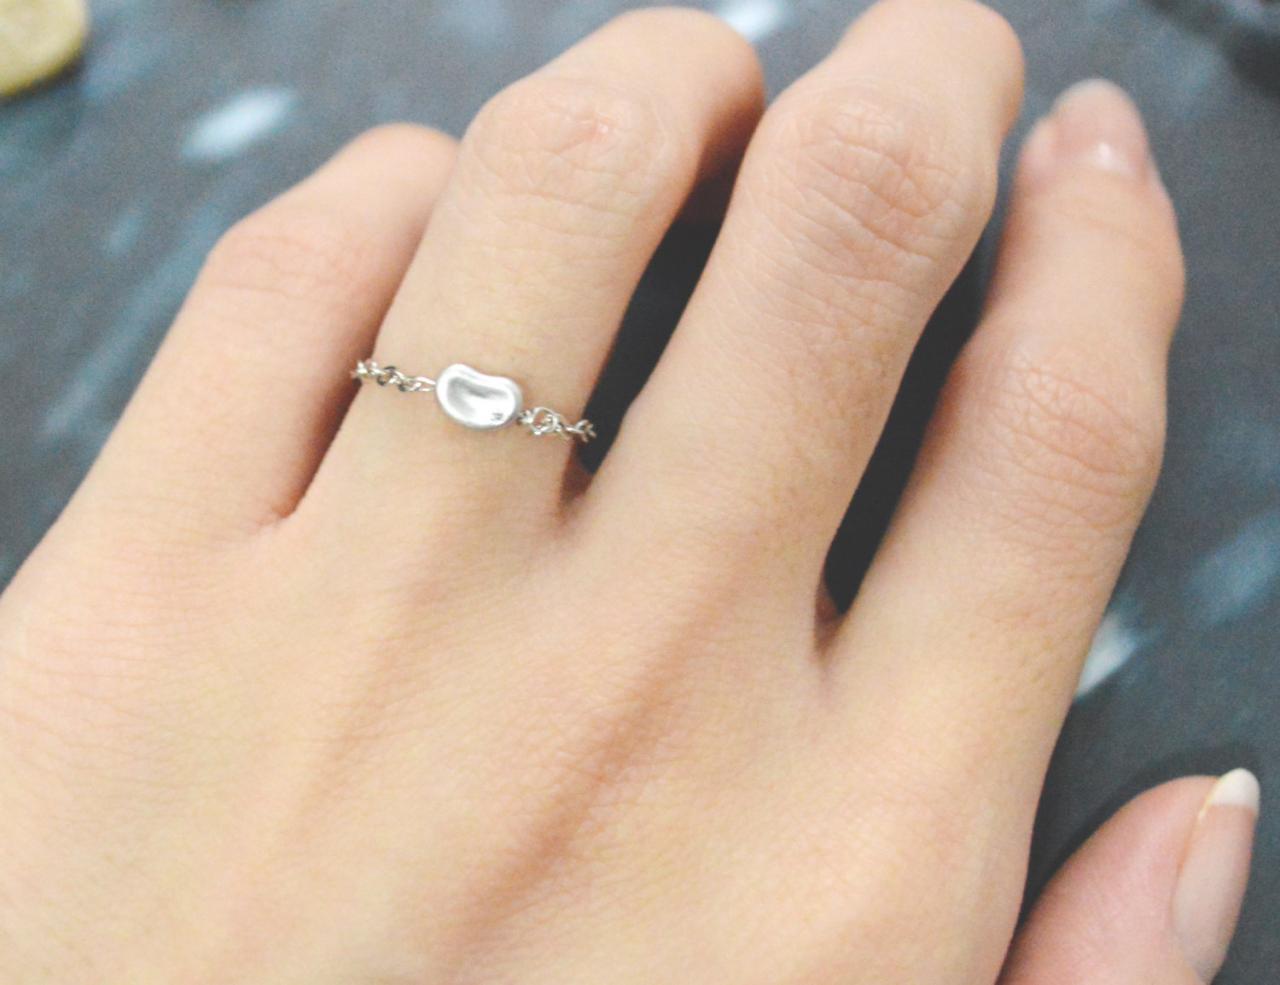 E-052 Mini Bean Ring, Chain Ring, Cubic Ring, Simple Ring, Modern Ring, Silver Plated Ring/everyday/gift/